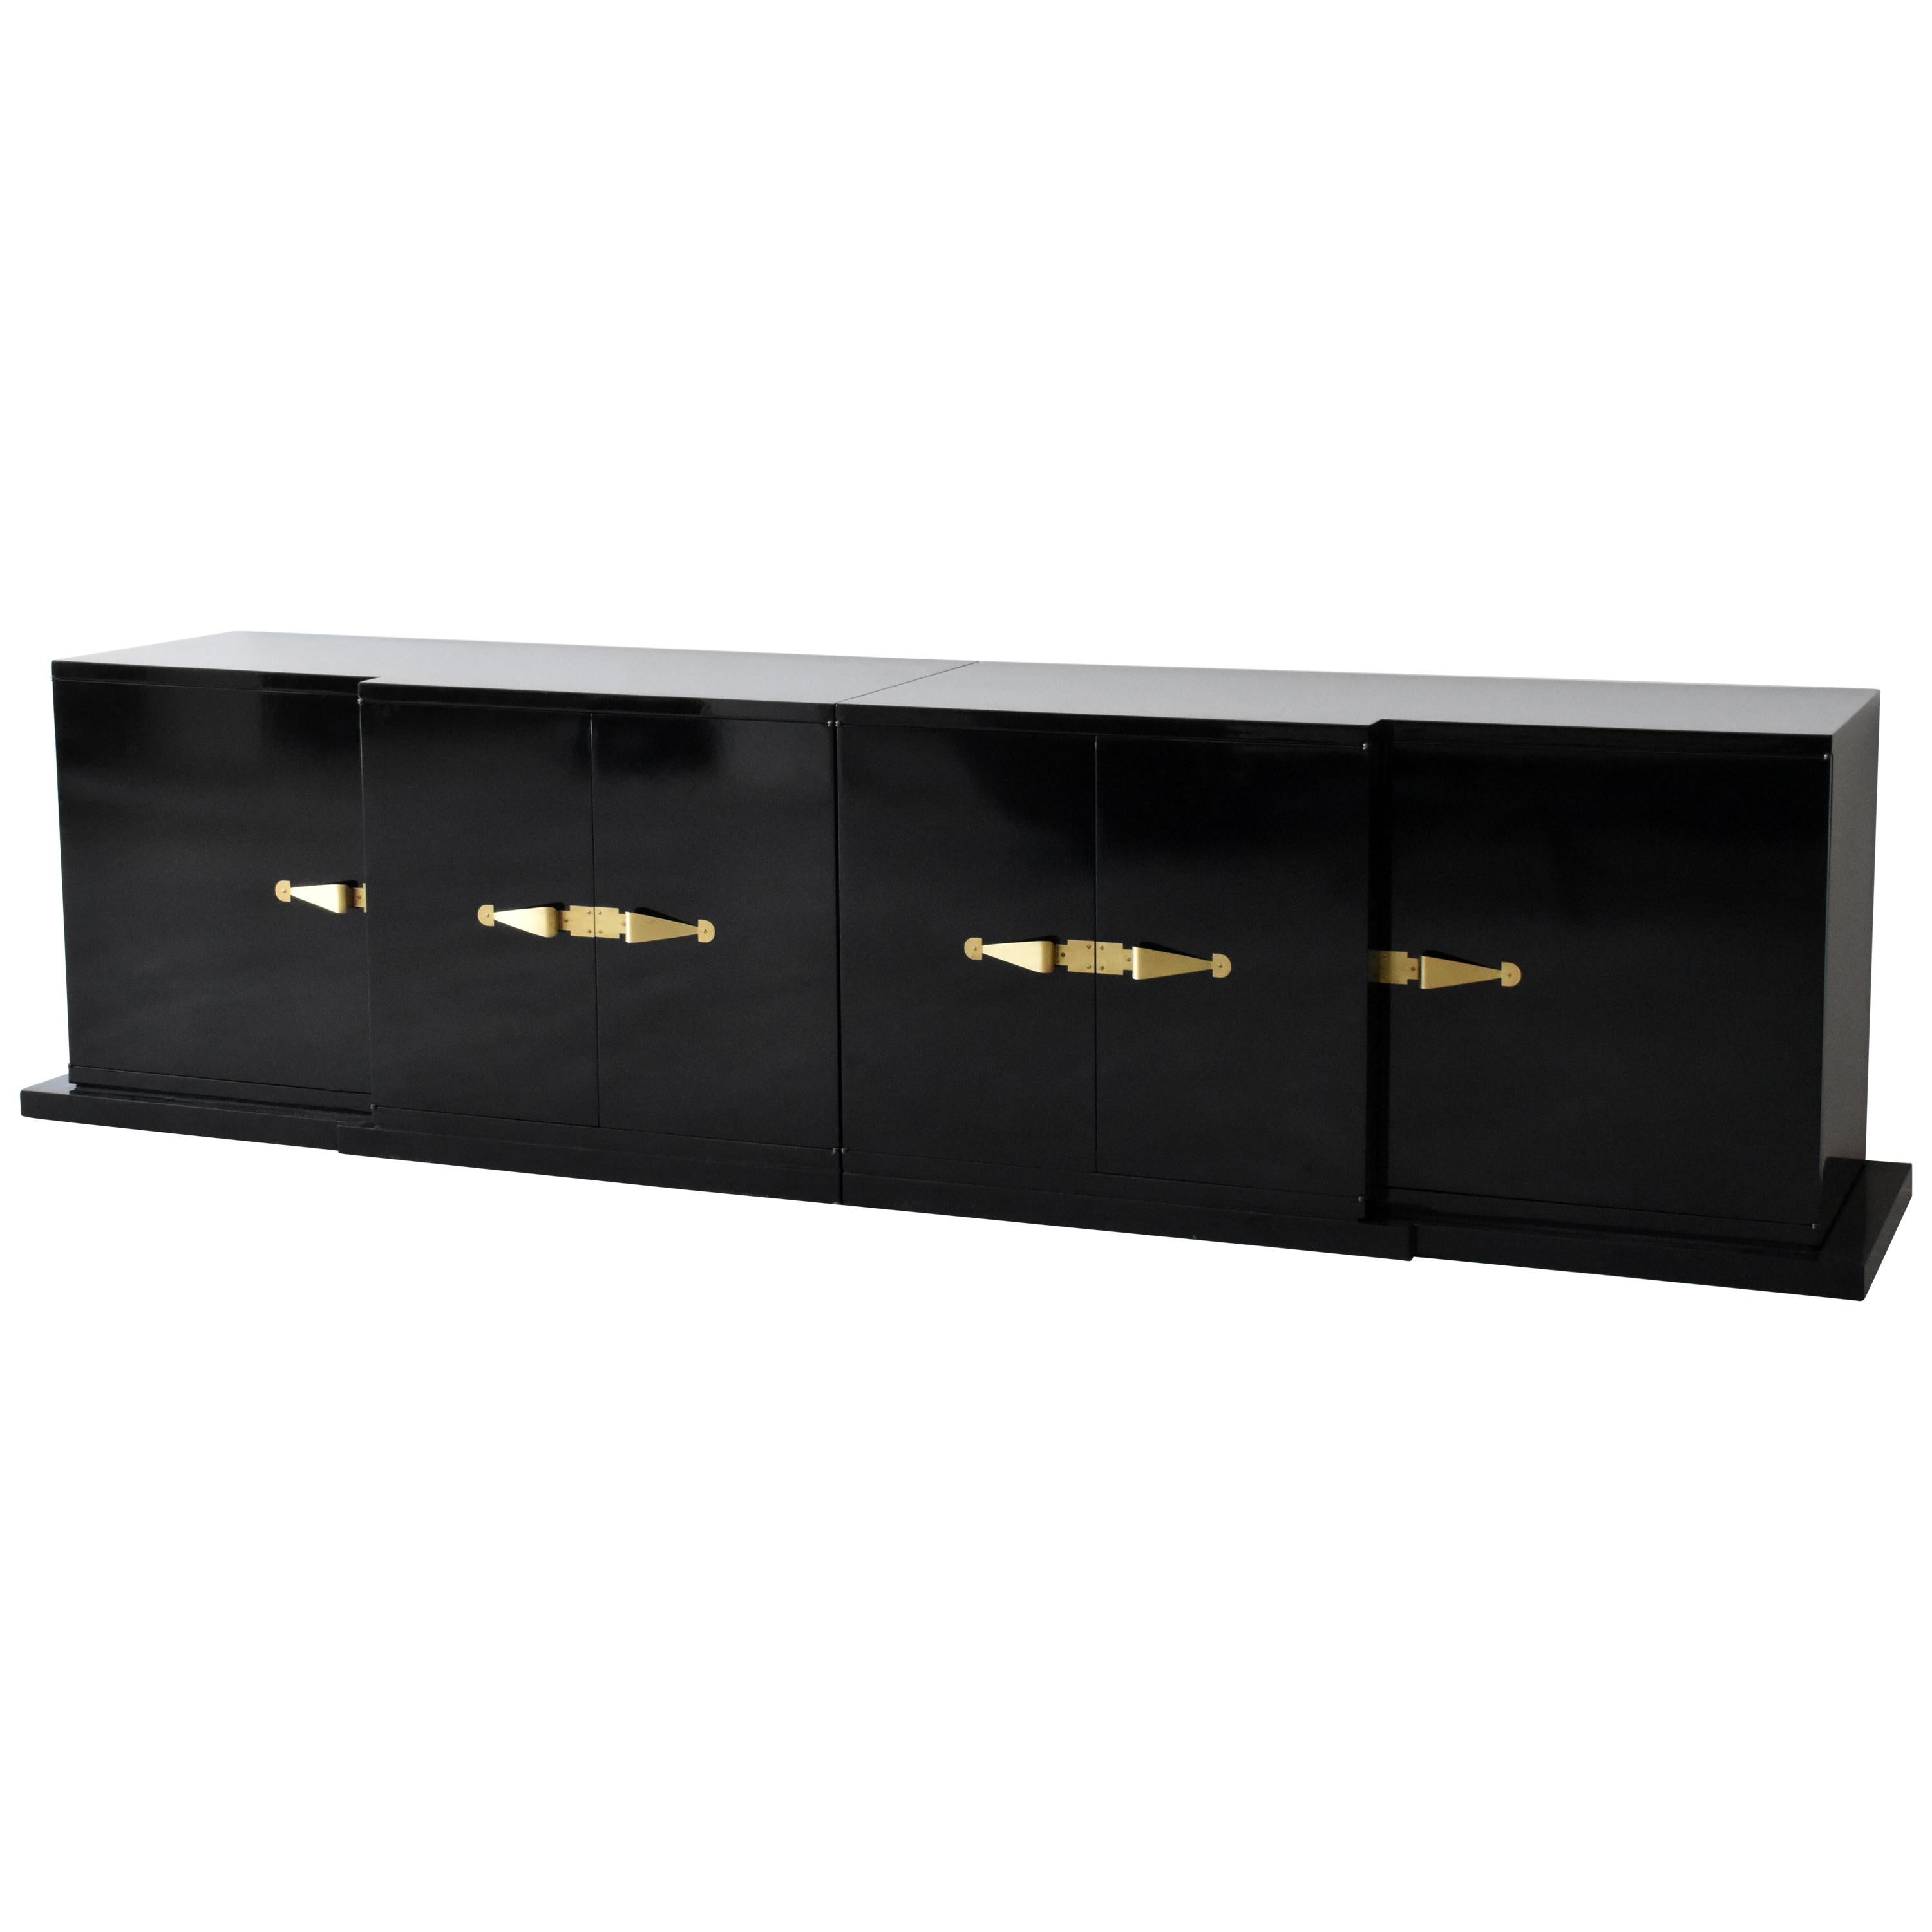 Tommi Parzinger, Large Black Lacquered Cabinet, Brass Pulls, Wood, 1960s